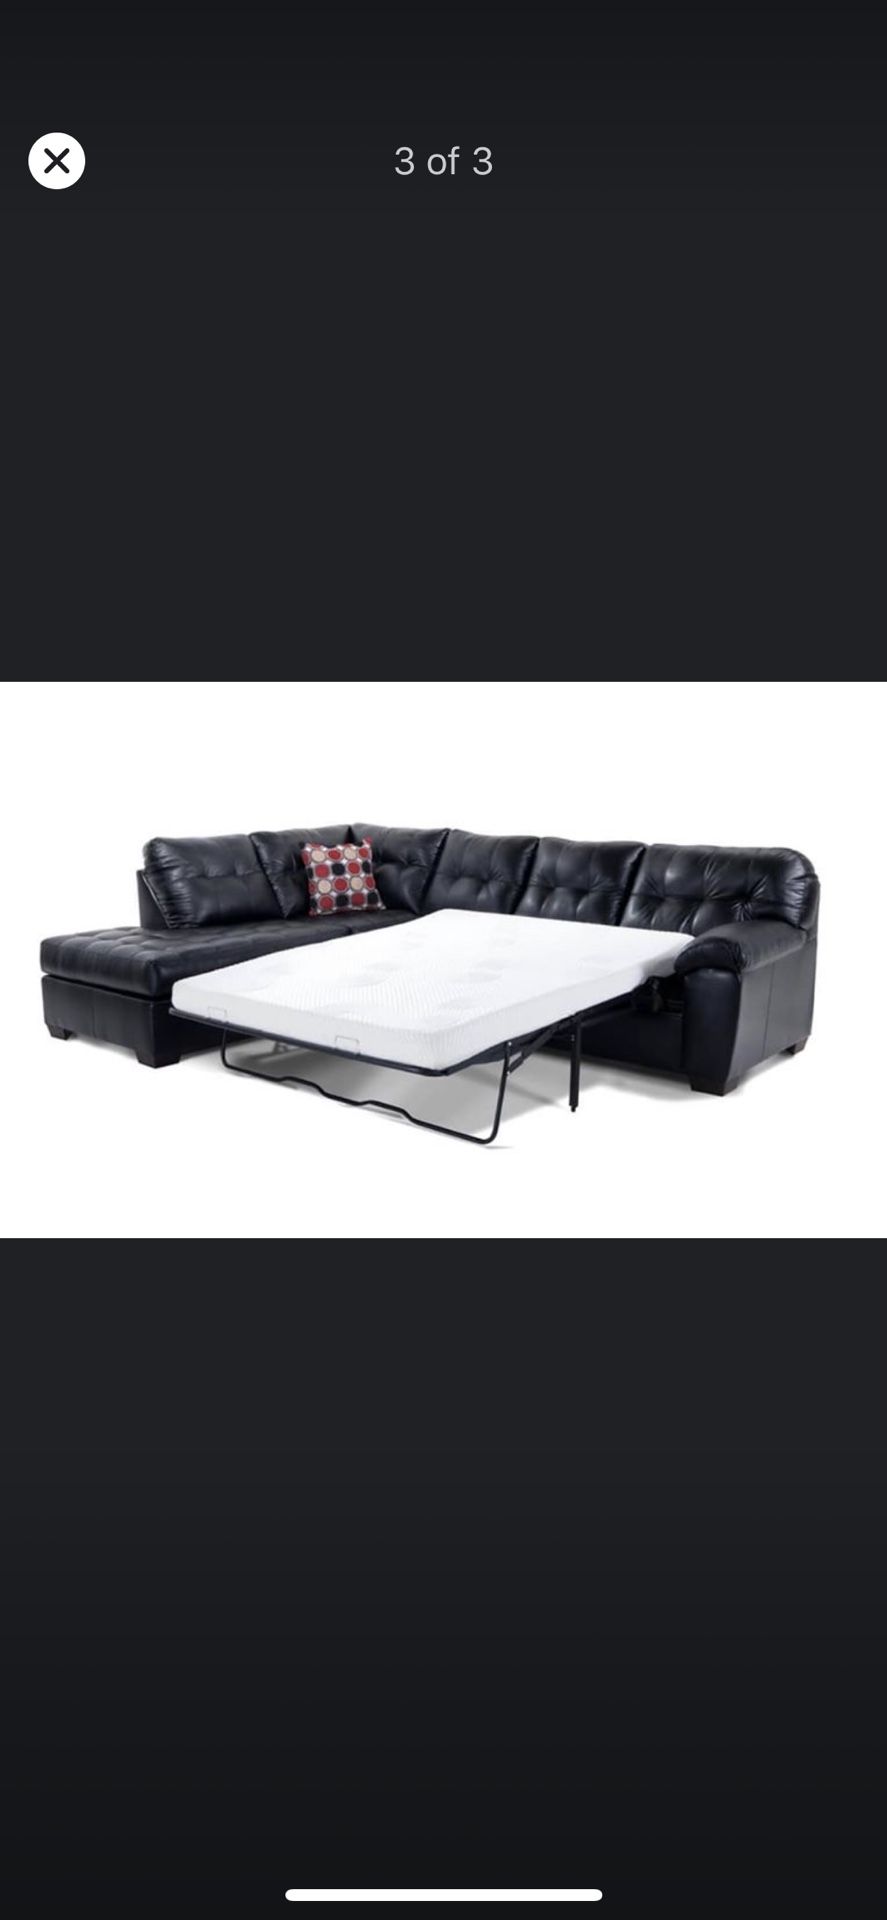 Selling black sleeper couch